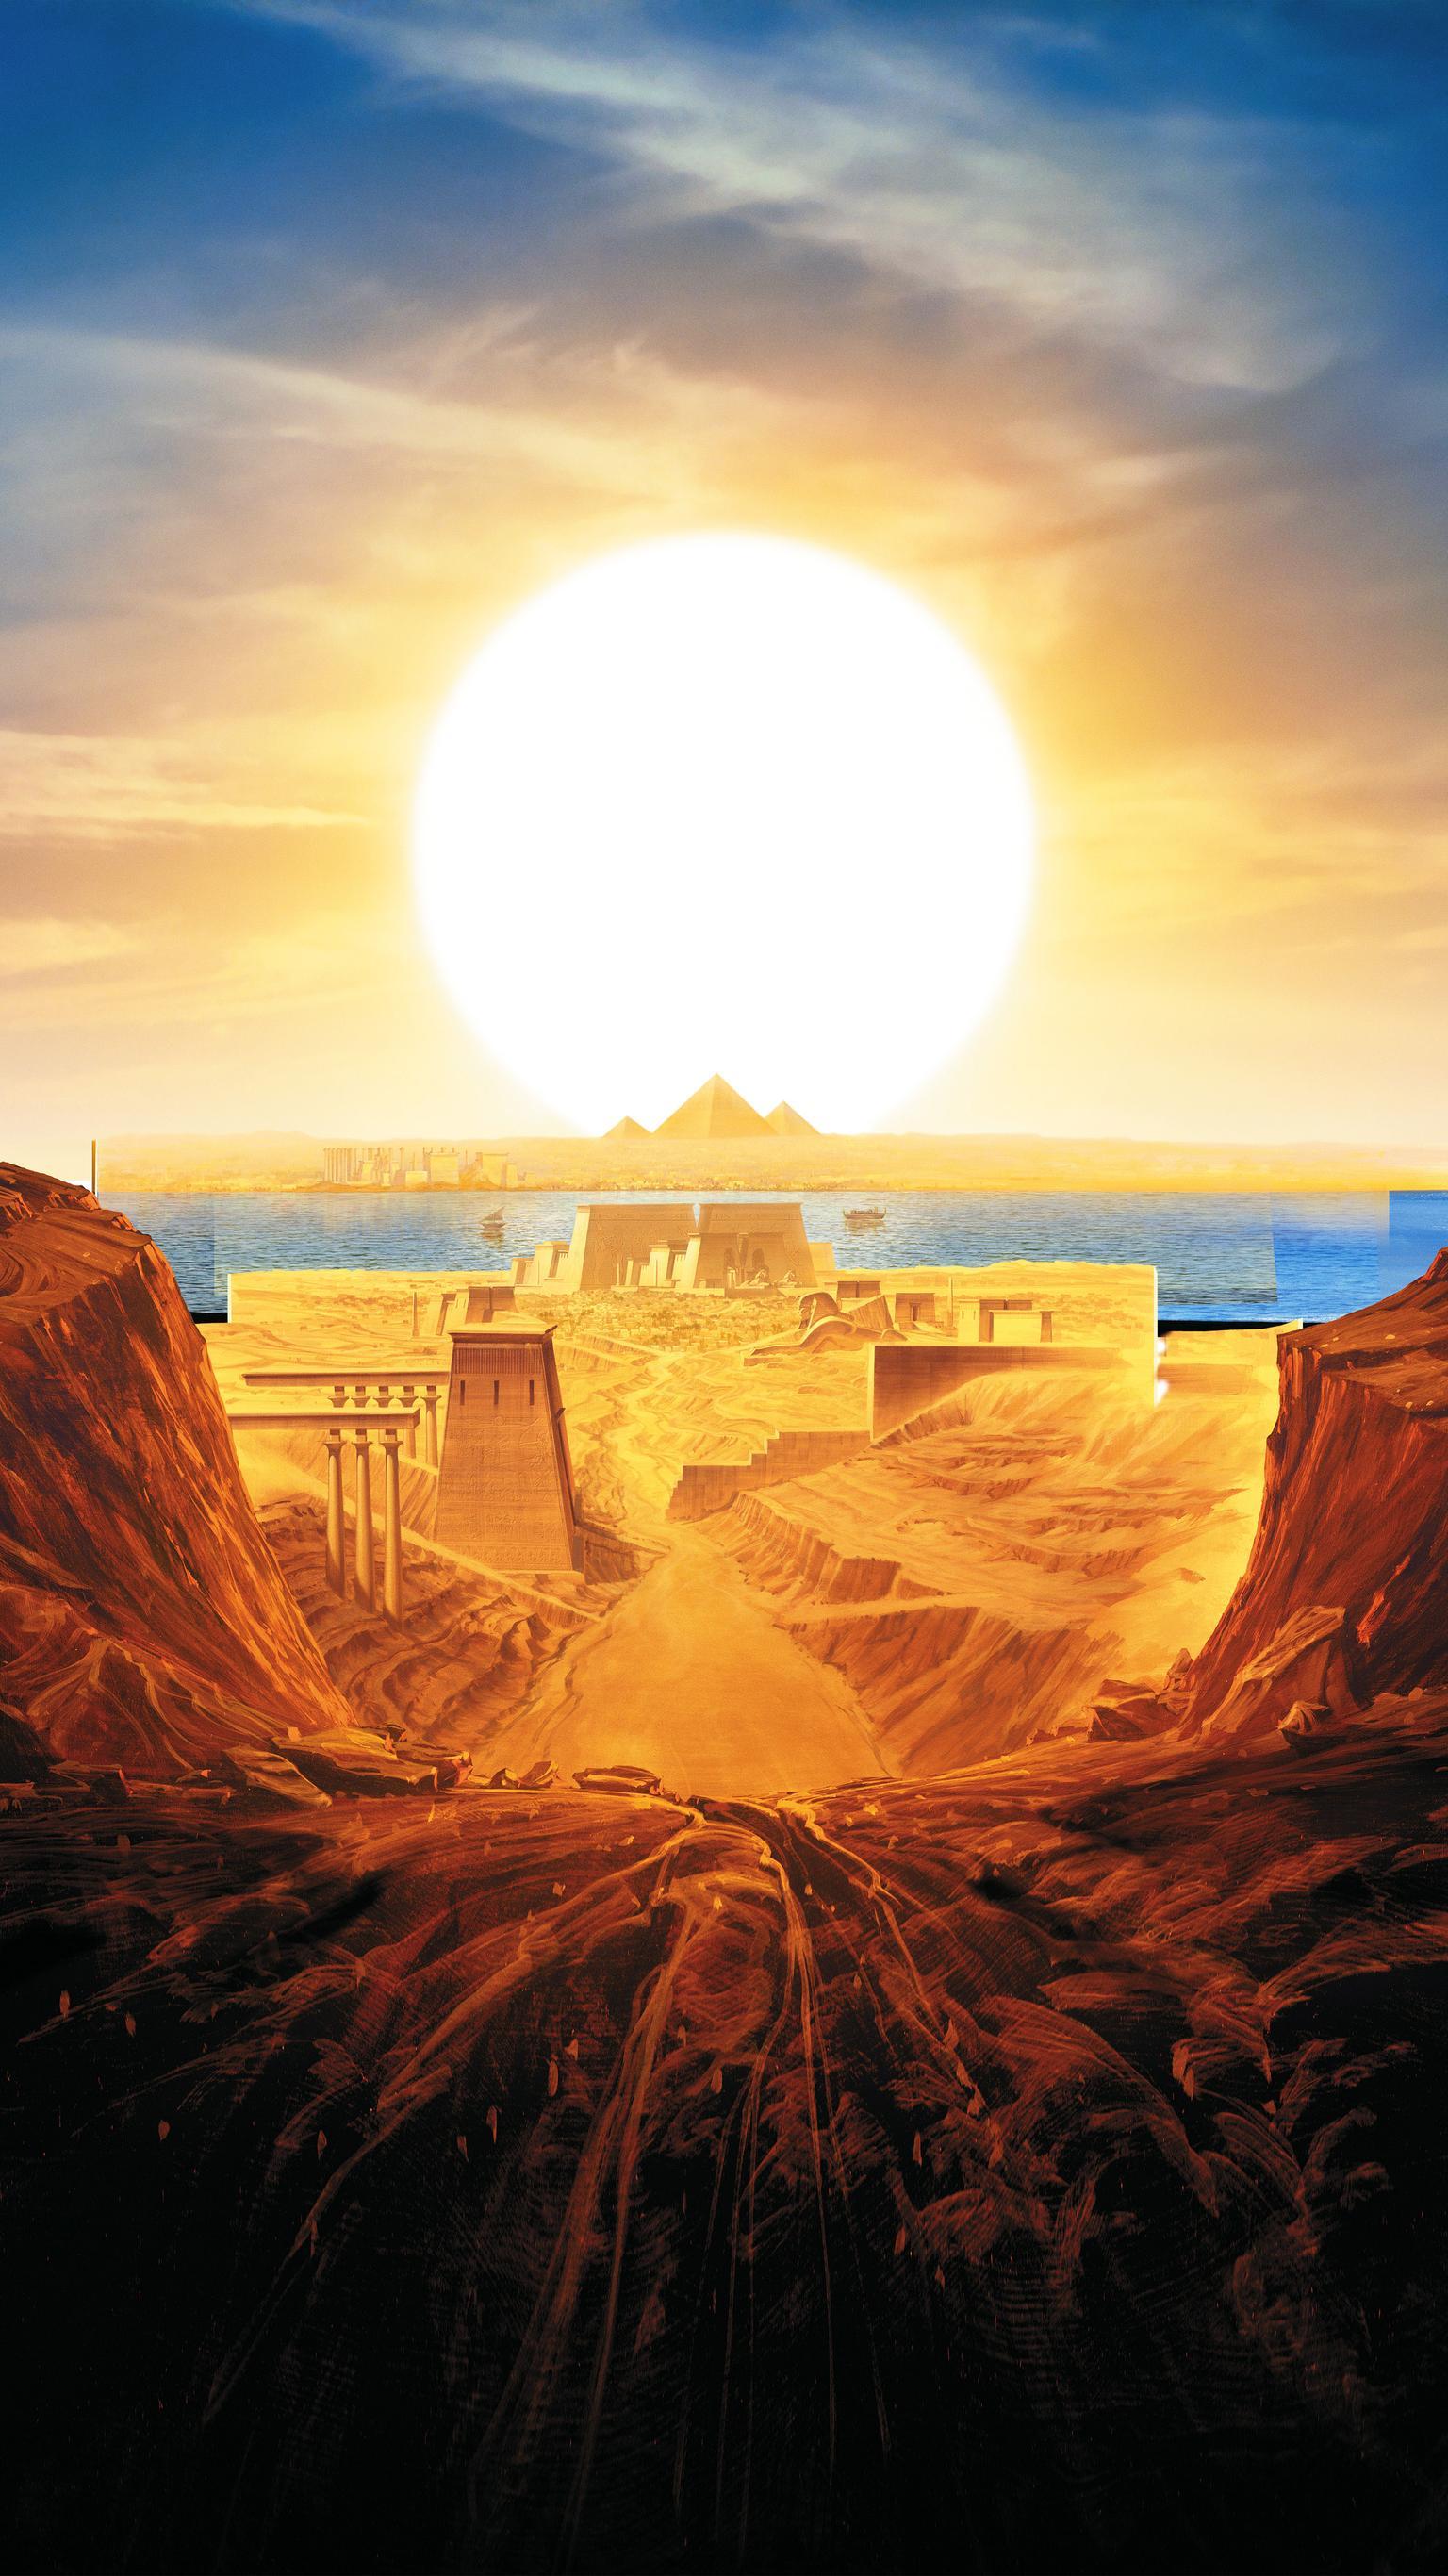 the prince of egypt online hd free